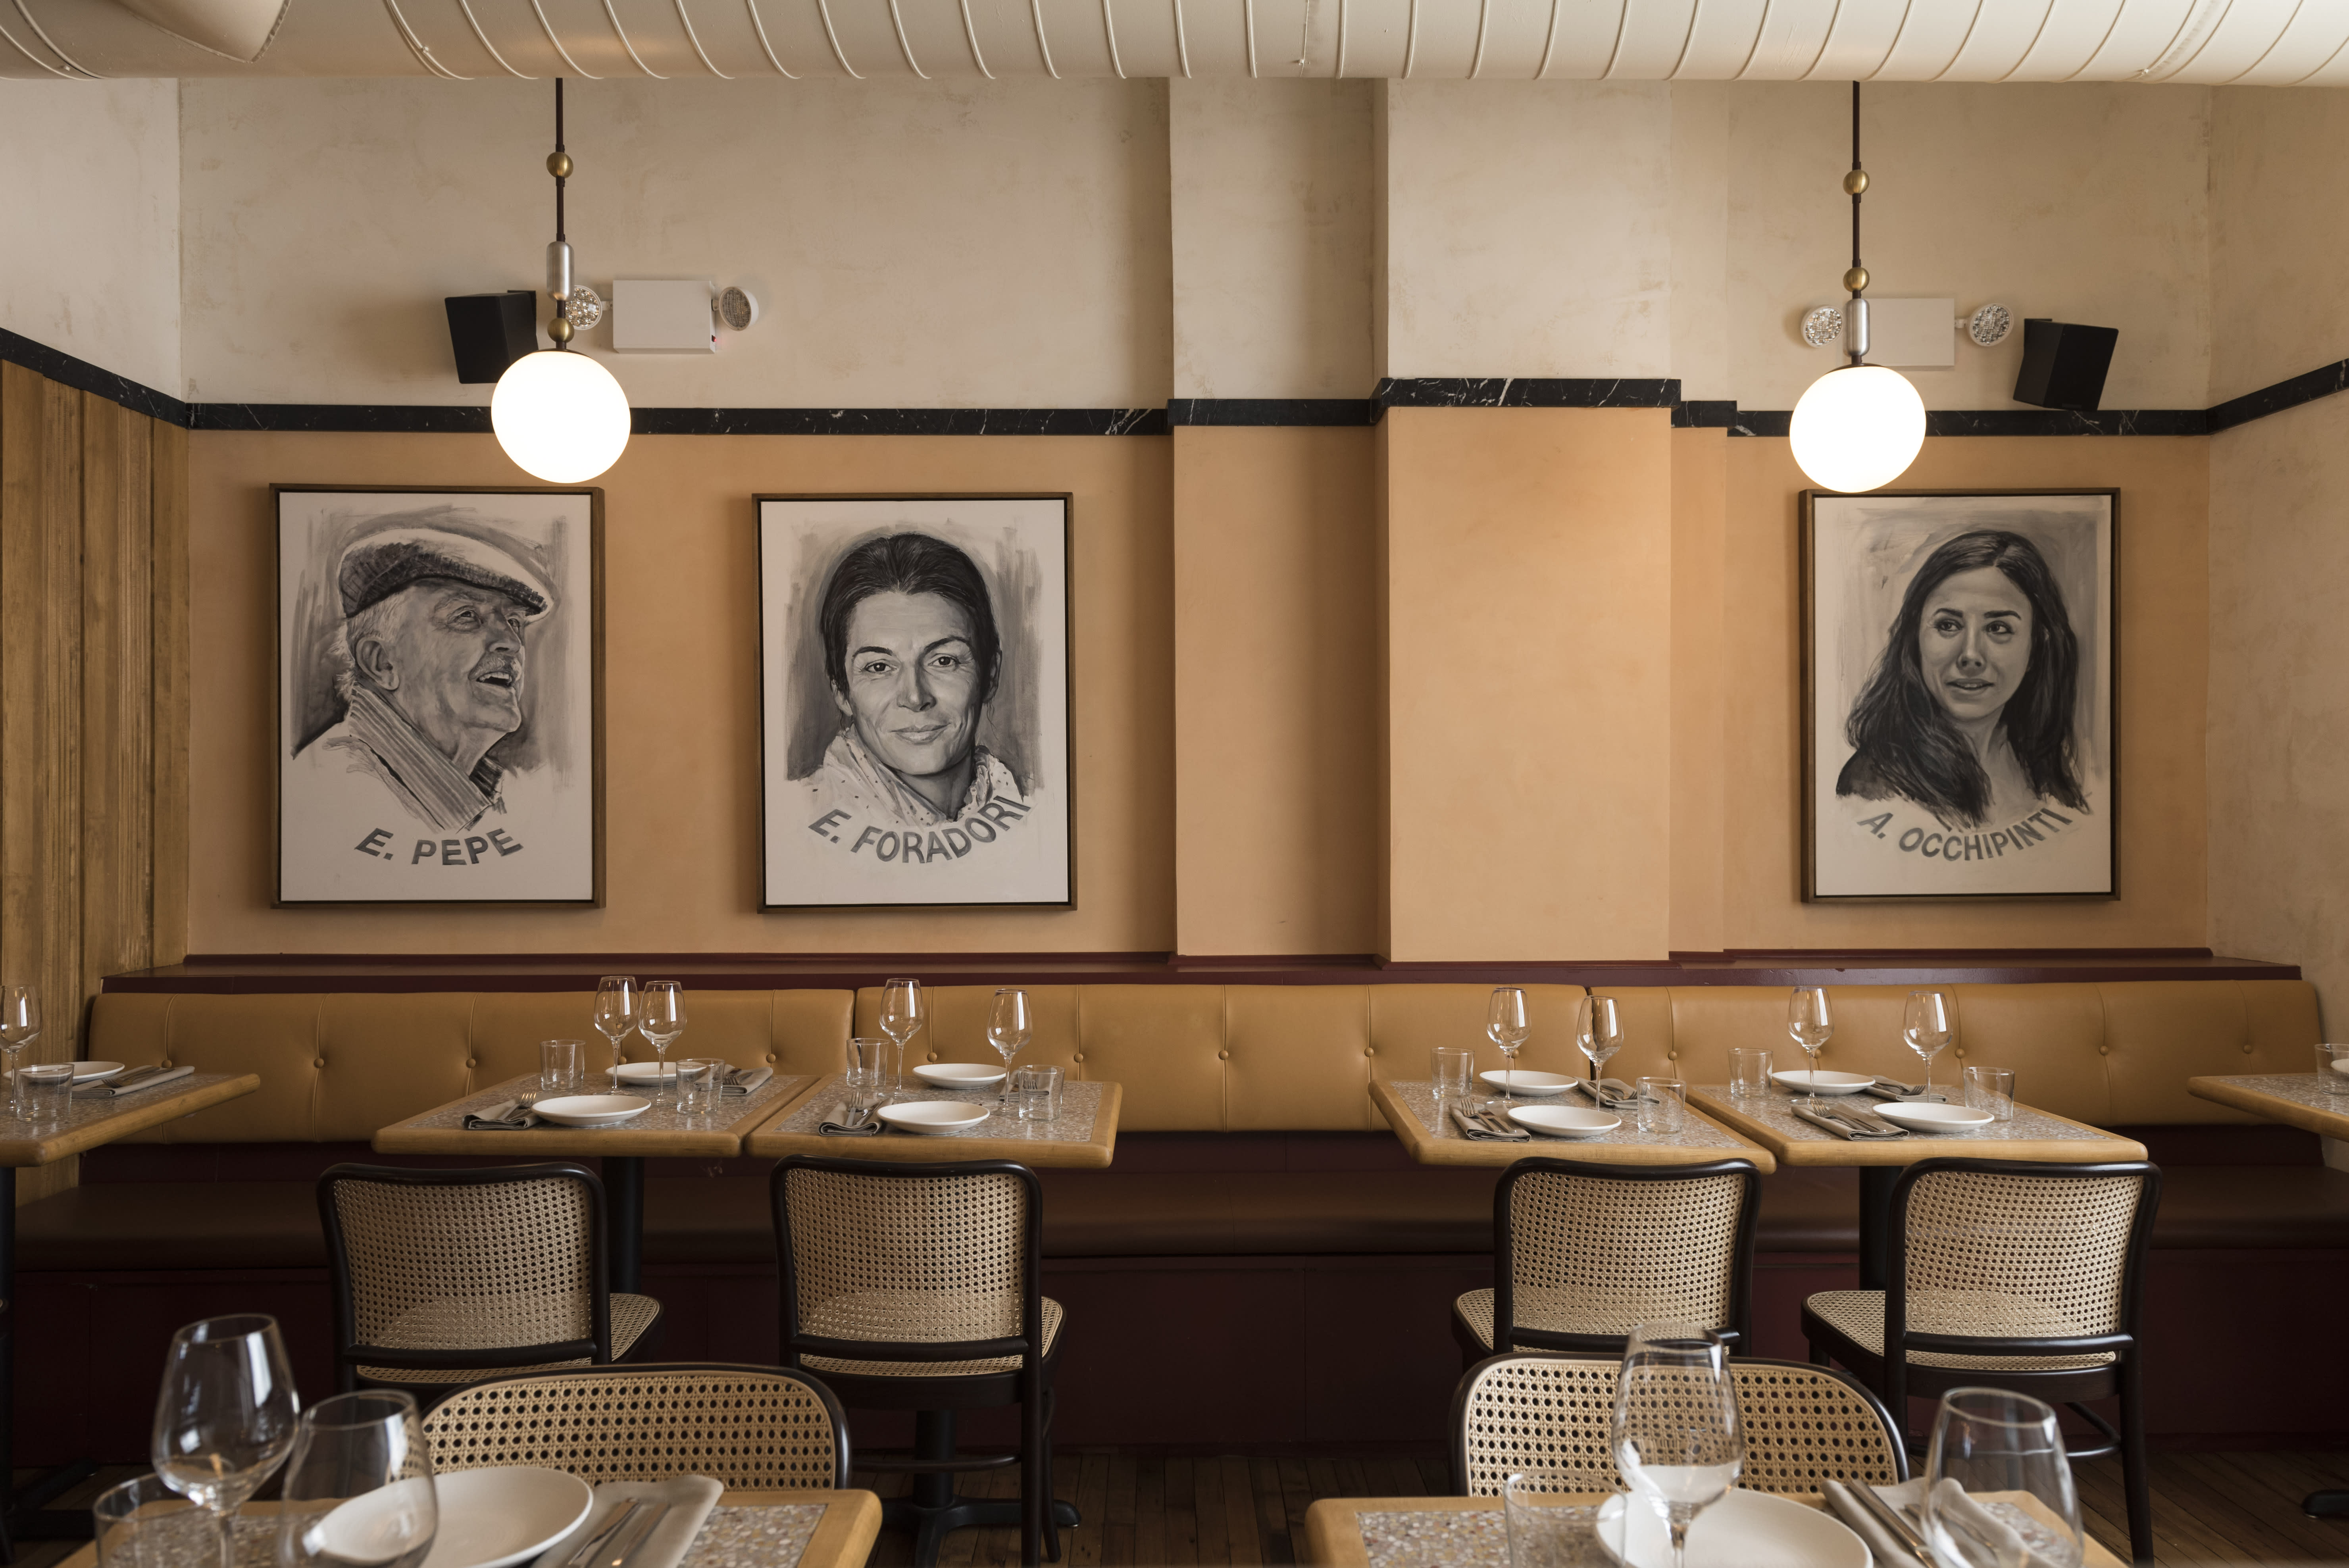 Brooklyn DOP Review - Park Slope - New York - The Infatuation